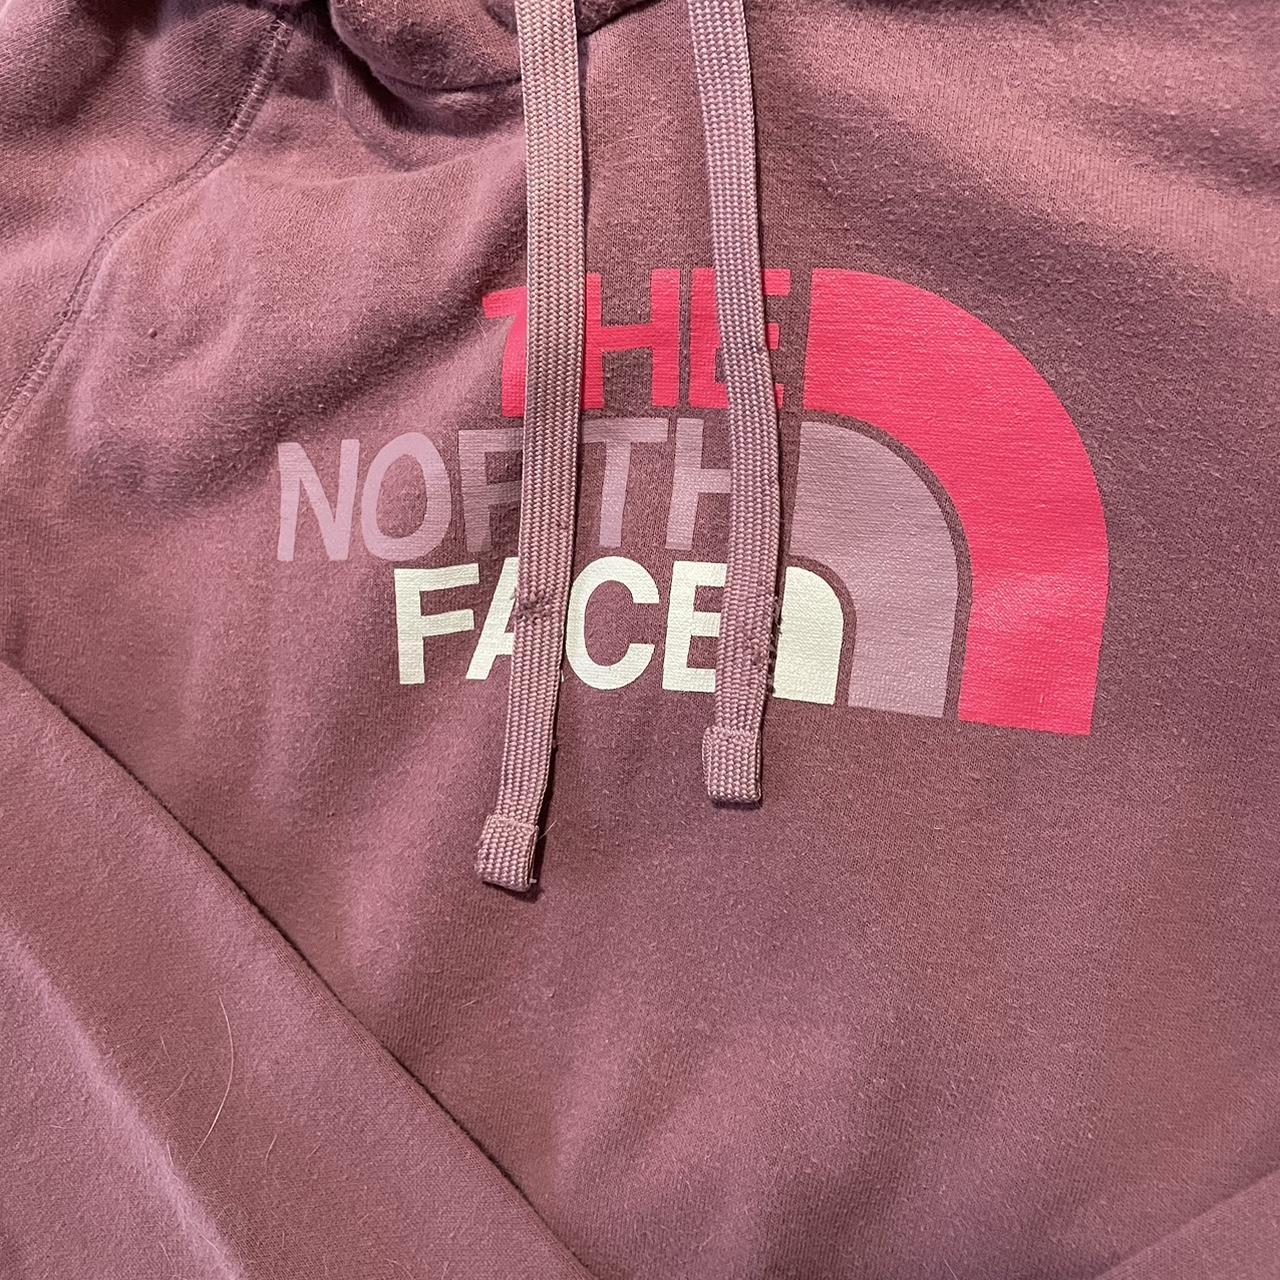 The North Face Women's Pink and White Hoodie